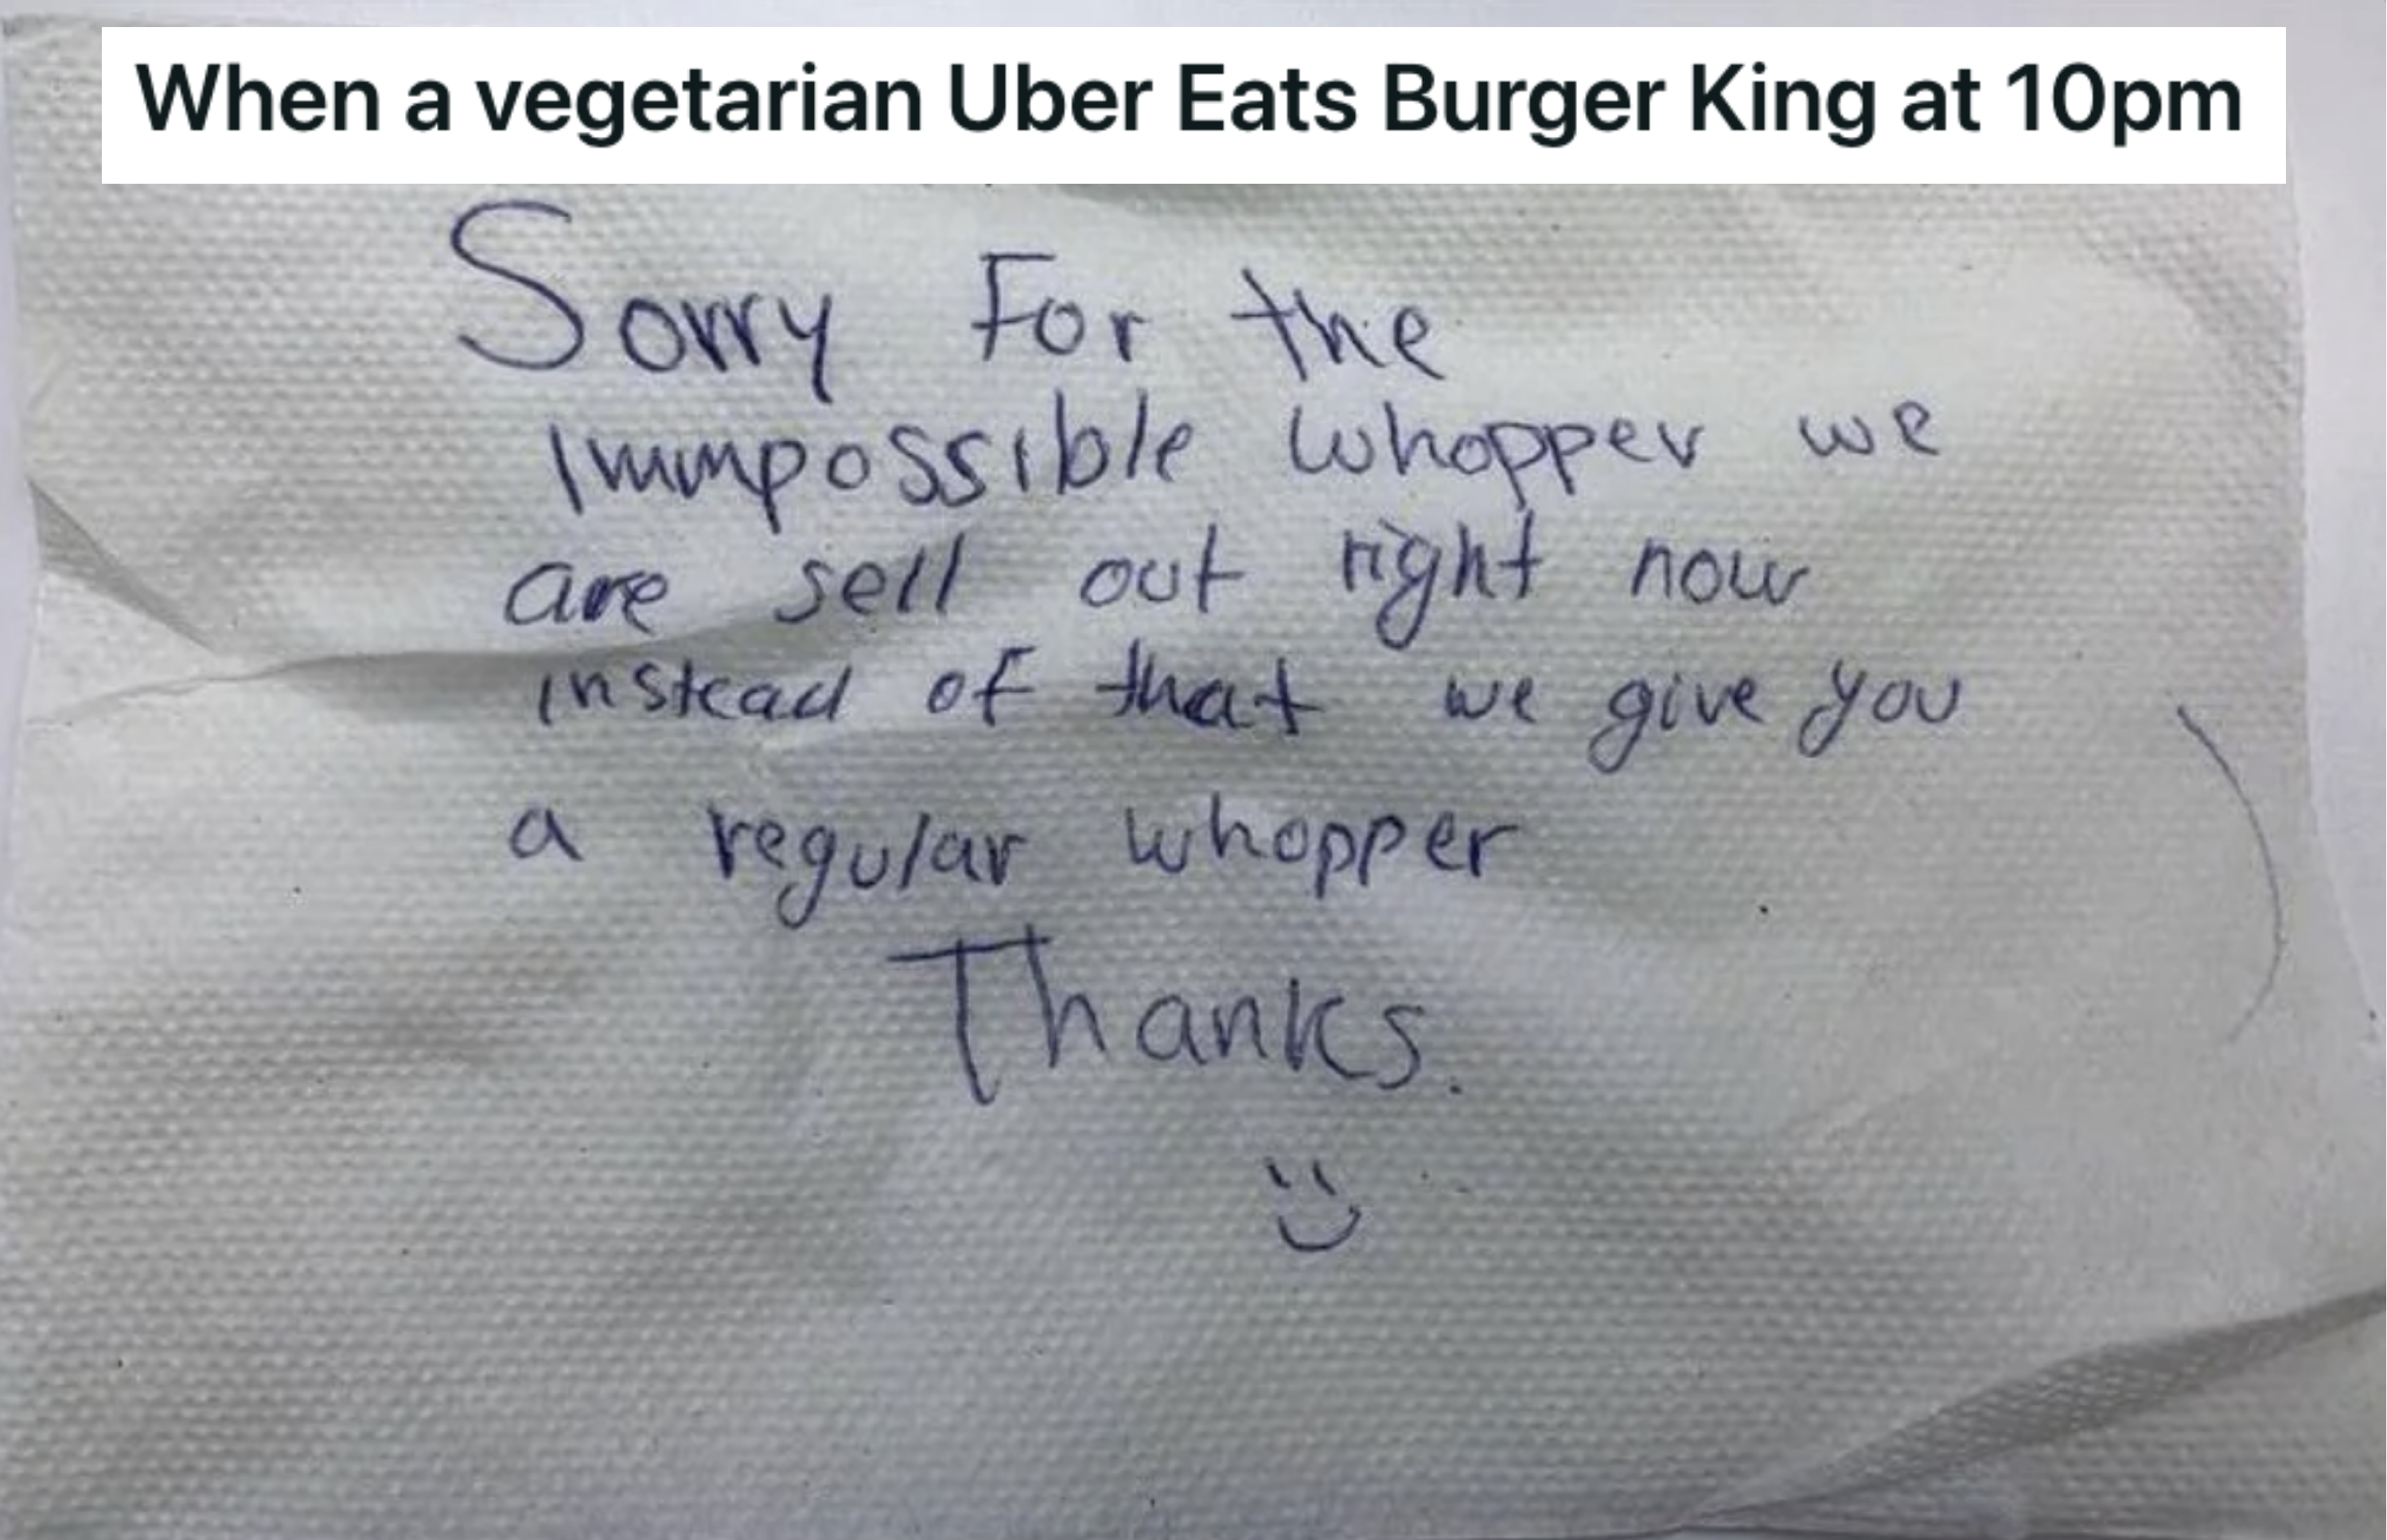 A napkin that says, &quot;Sorry for the Impossible Whopper we are sell out right now instead of that we give you a regular Whopper&quot;